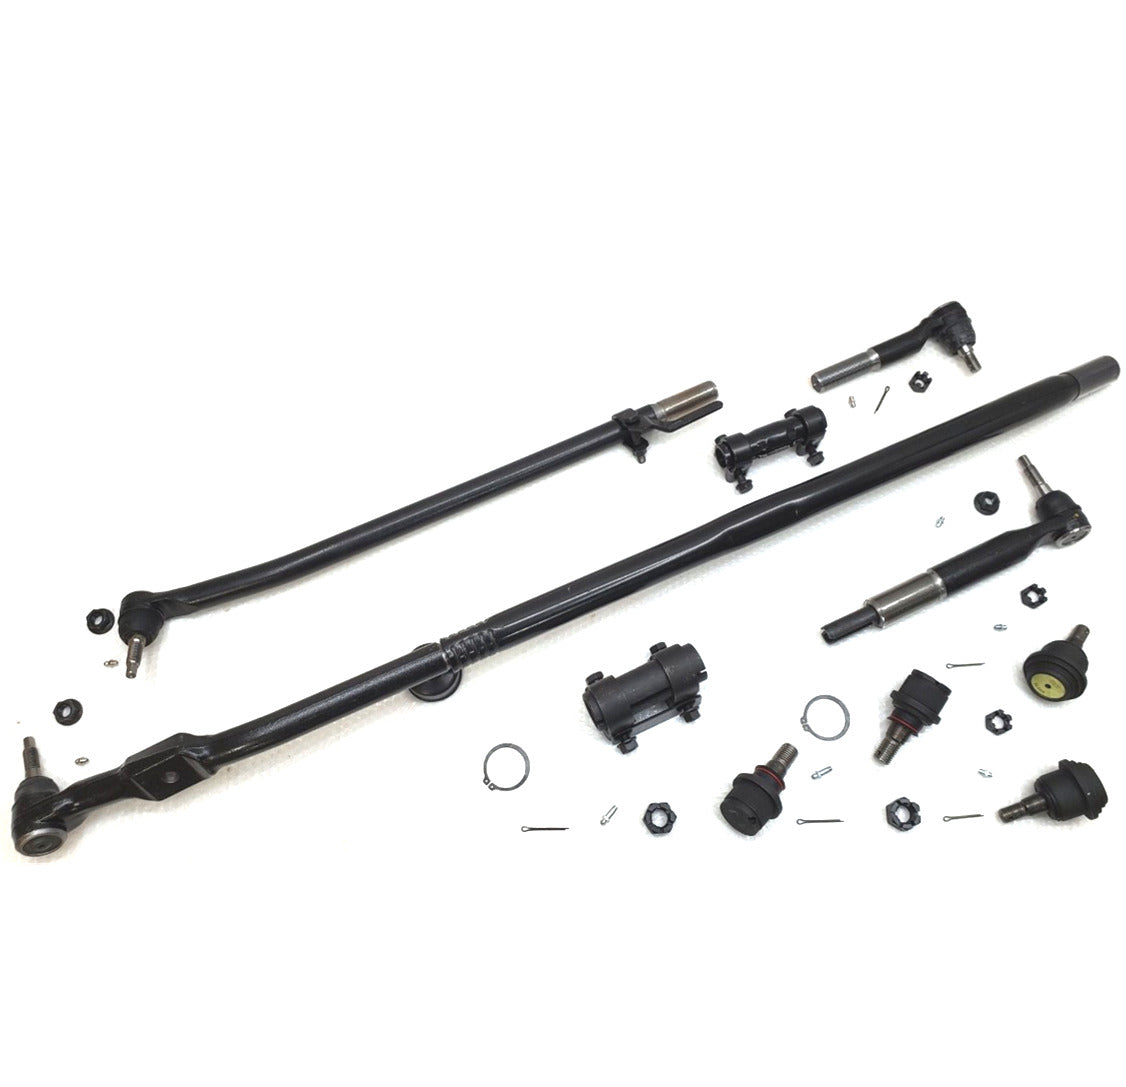 XRF Steering and Suspension New T Design Kit for 2009-2012 Dodge Ram 2500, 3500 4x4